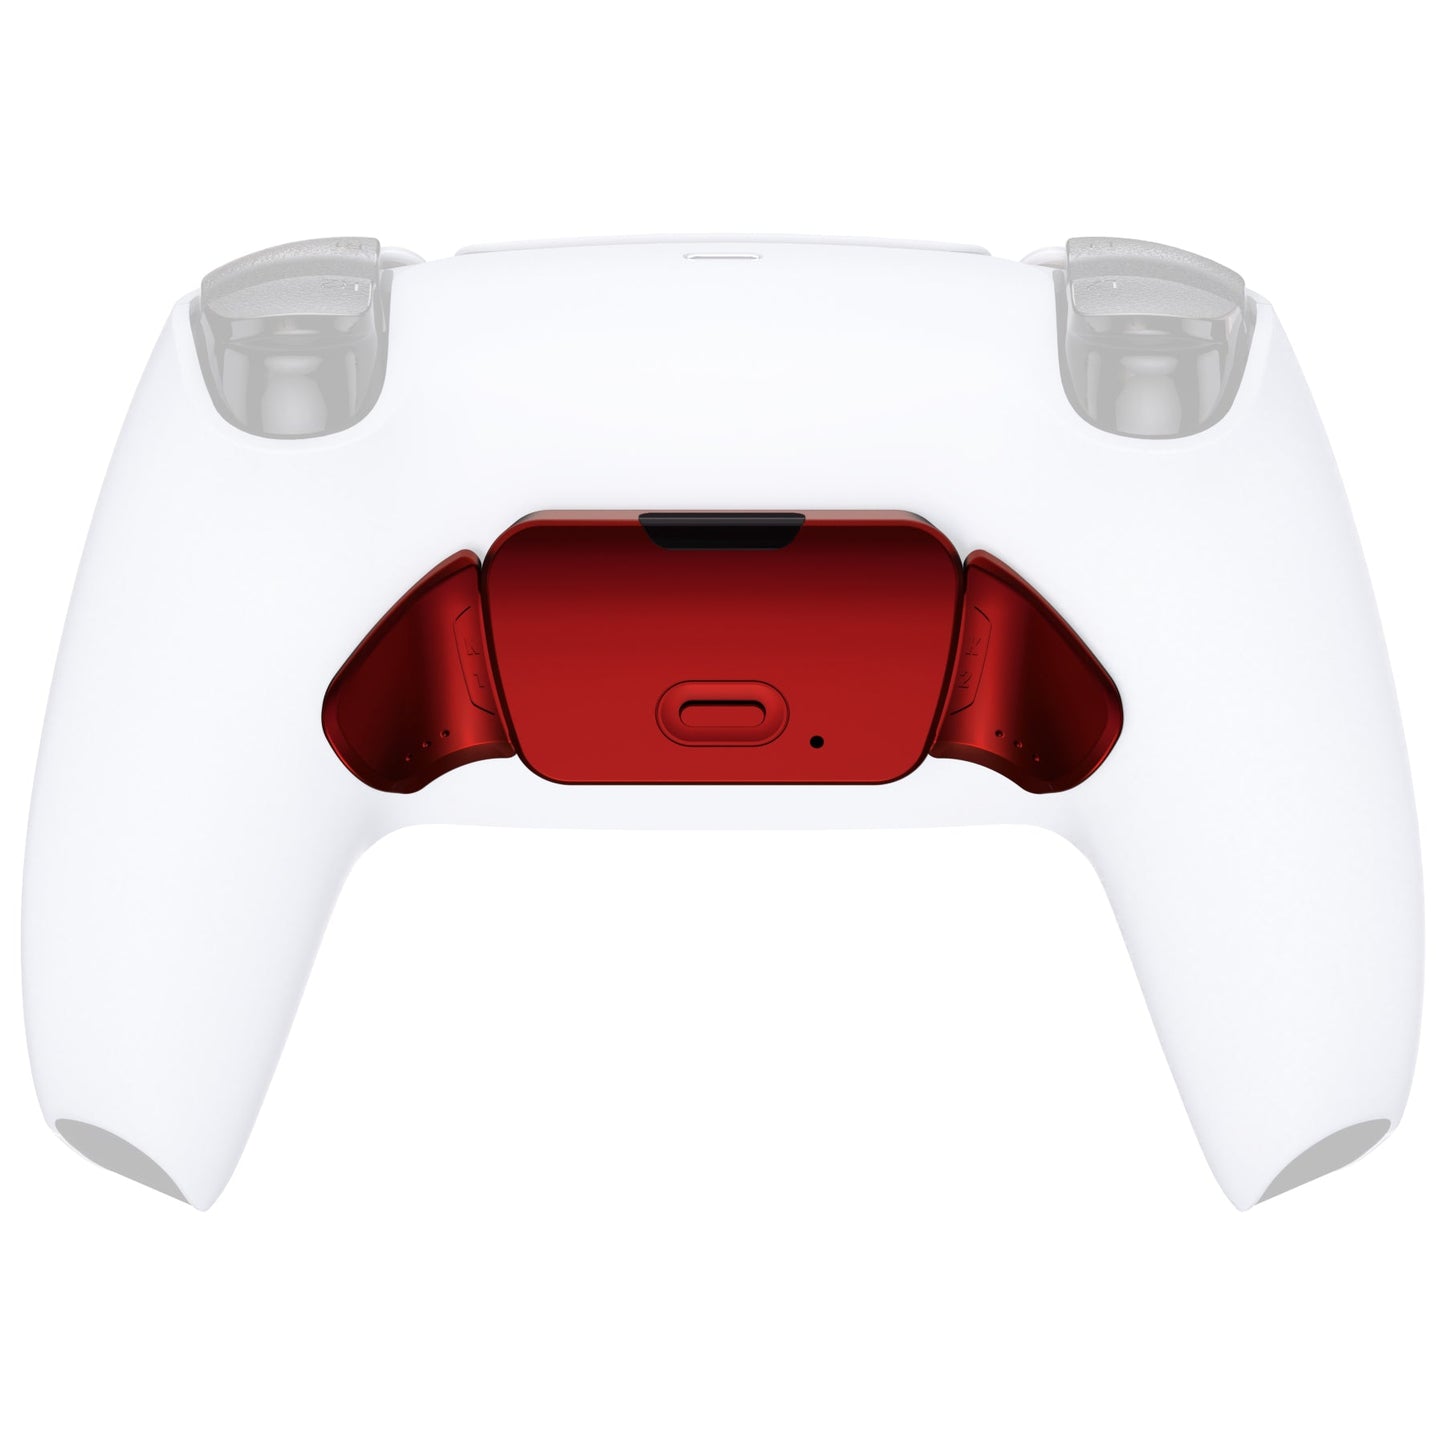 eXtremeRate Retail Scarlet Red Replacement Redesigned K1 K2 Back Button Housing Shell for ps5 Controller eXtremerate RISE Remap Kit - Controller & RISE Remap Board NOT Included - WPFP3003